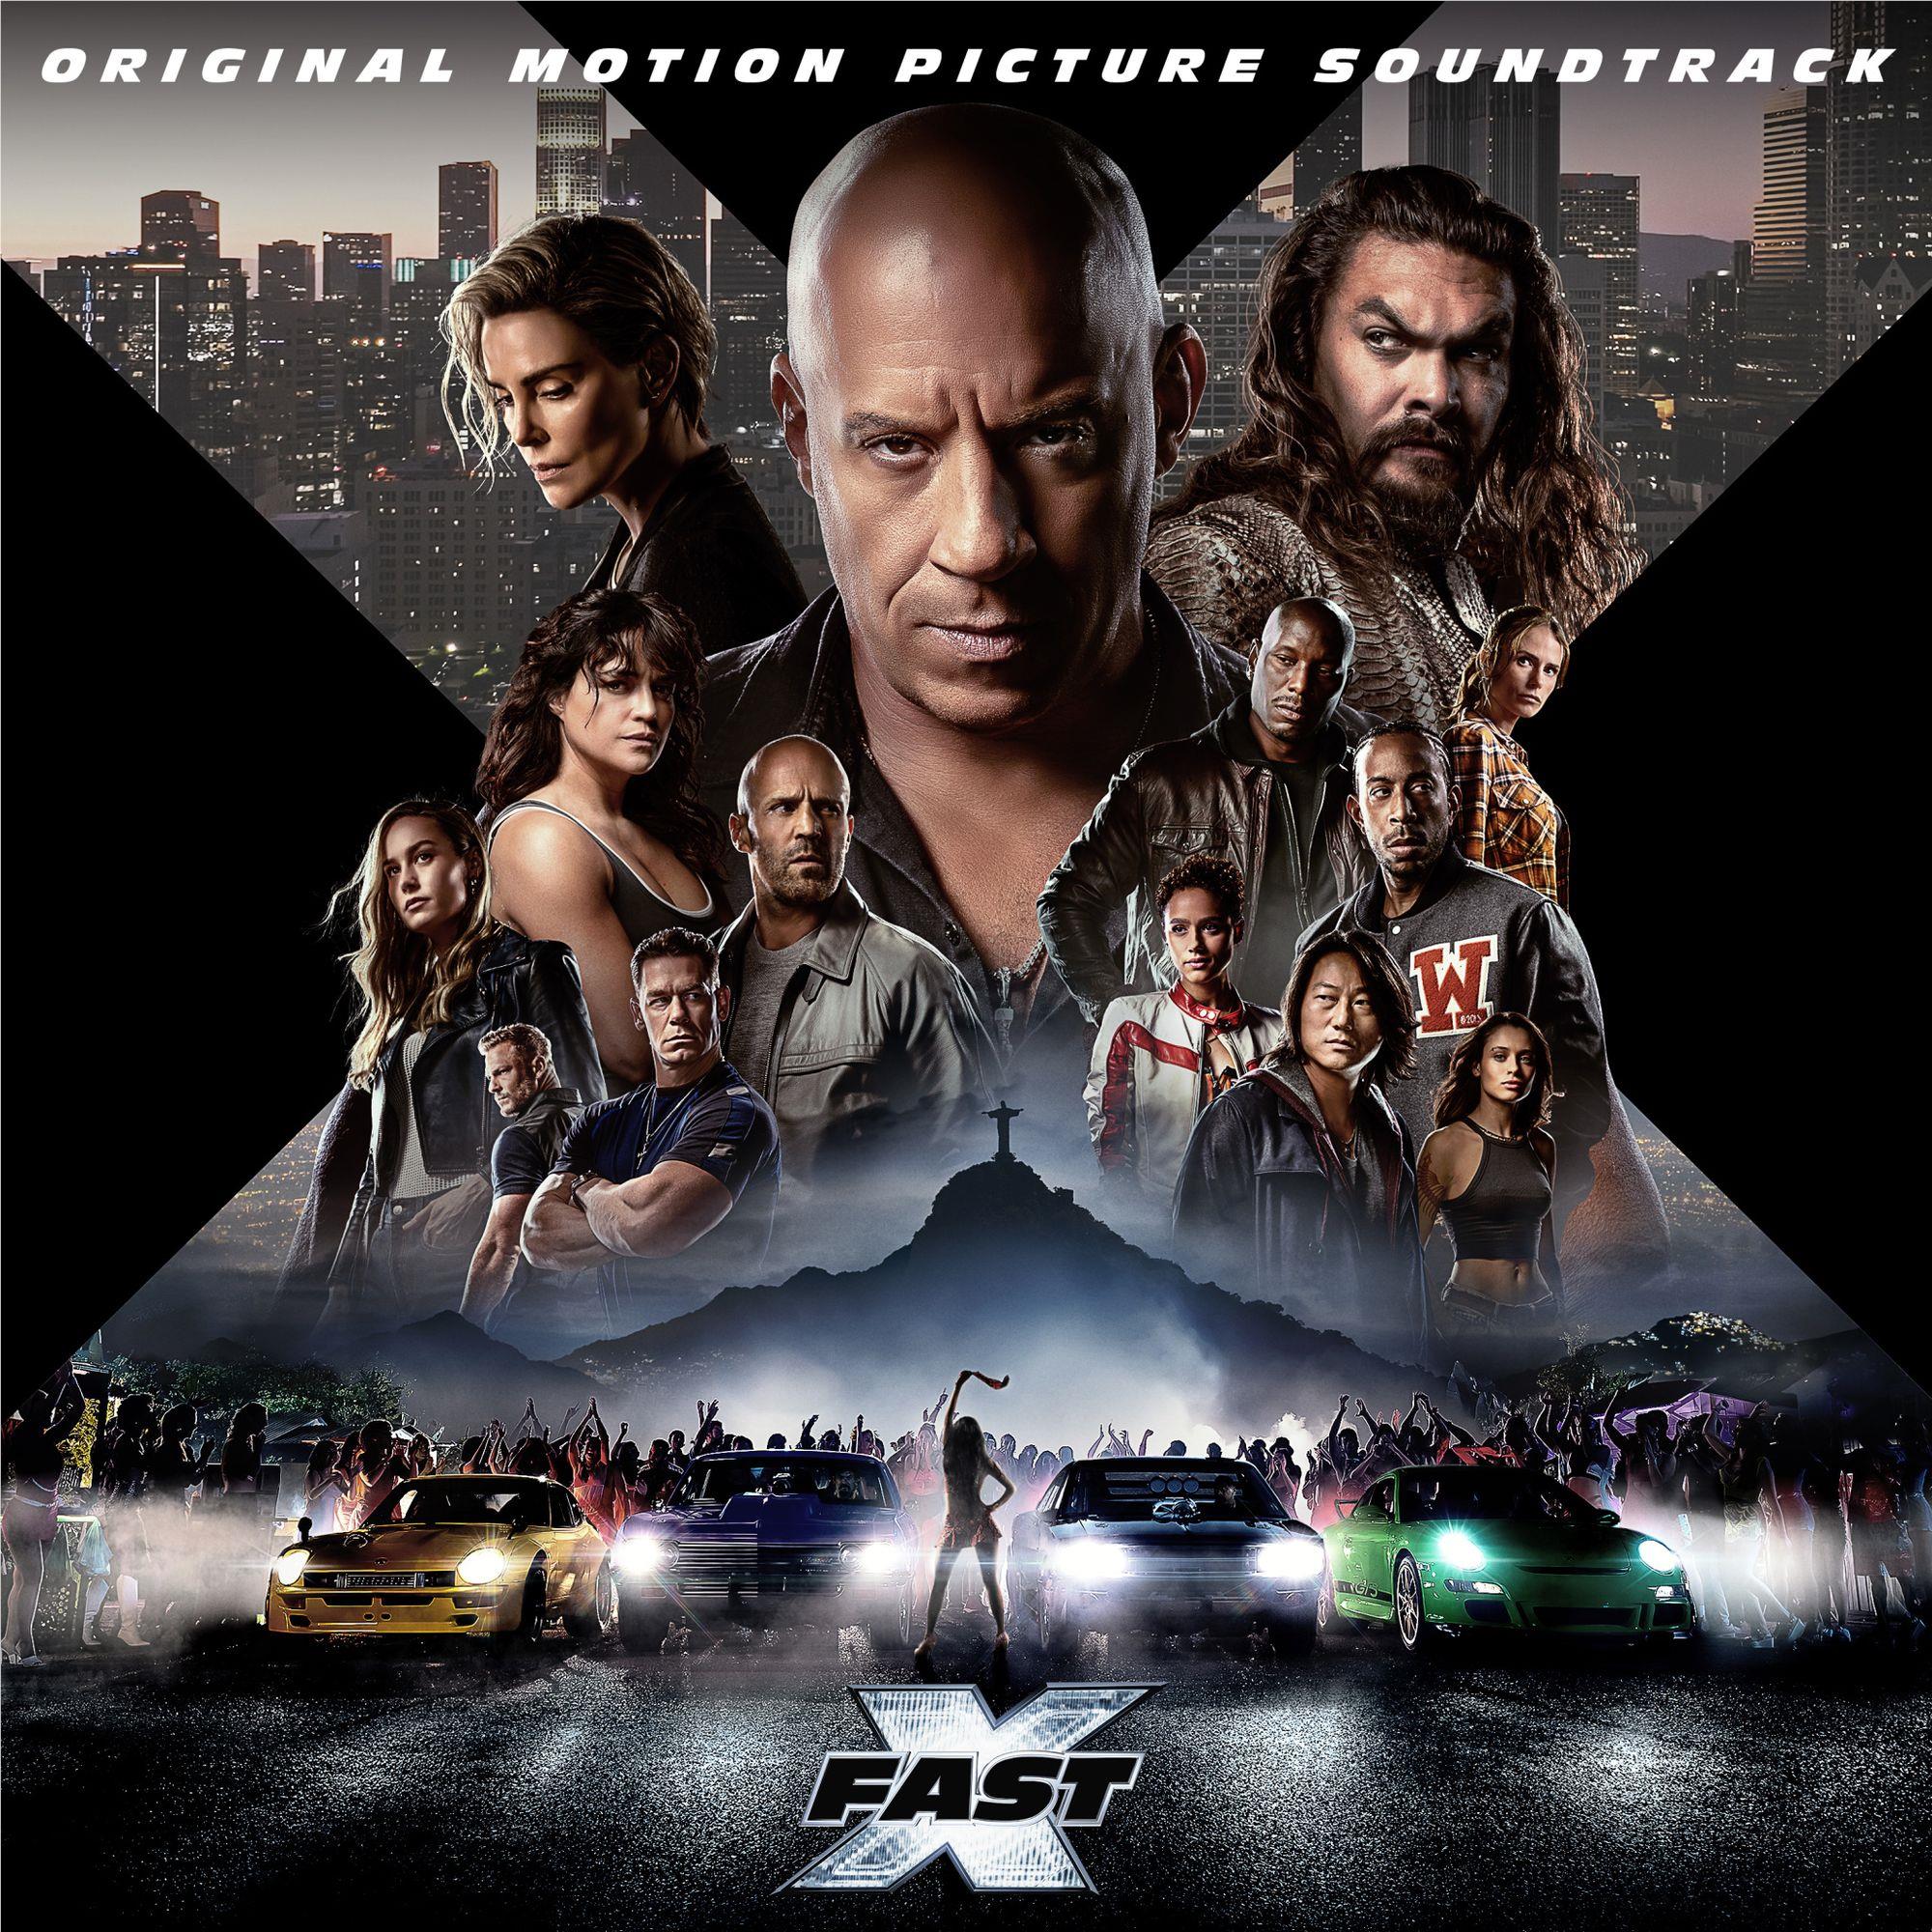 fast & furious x: the fast saga (original motion picture soundtrack)